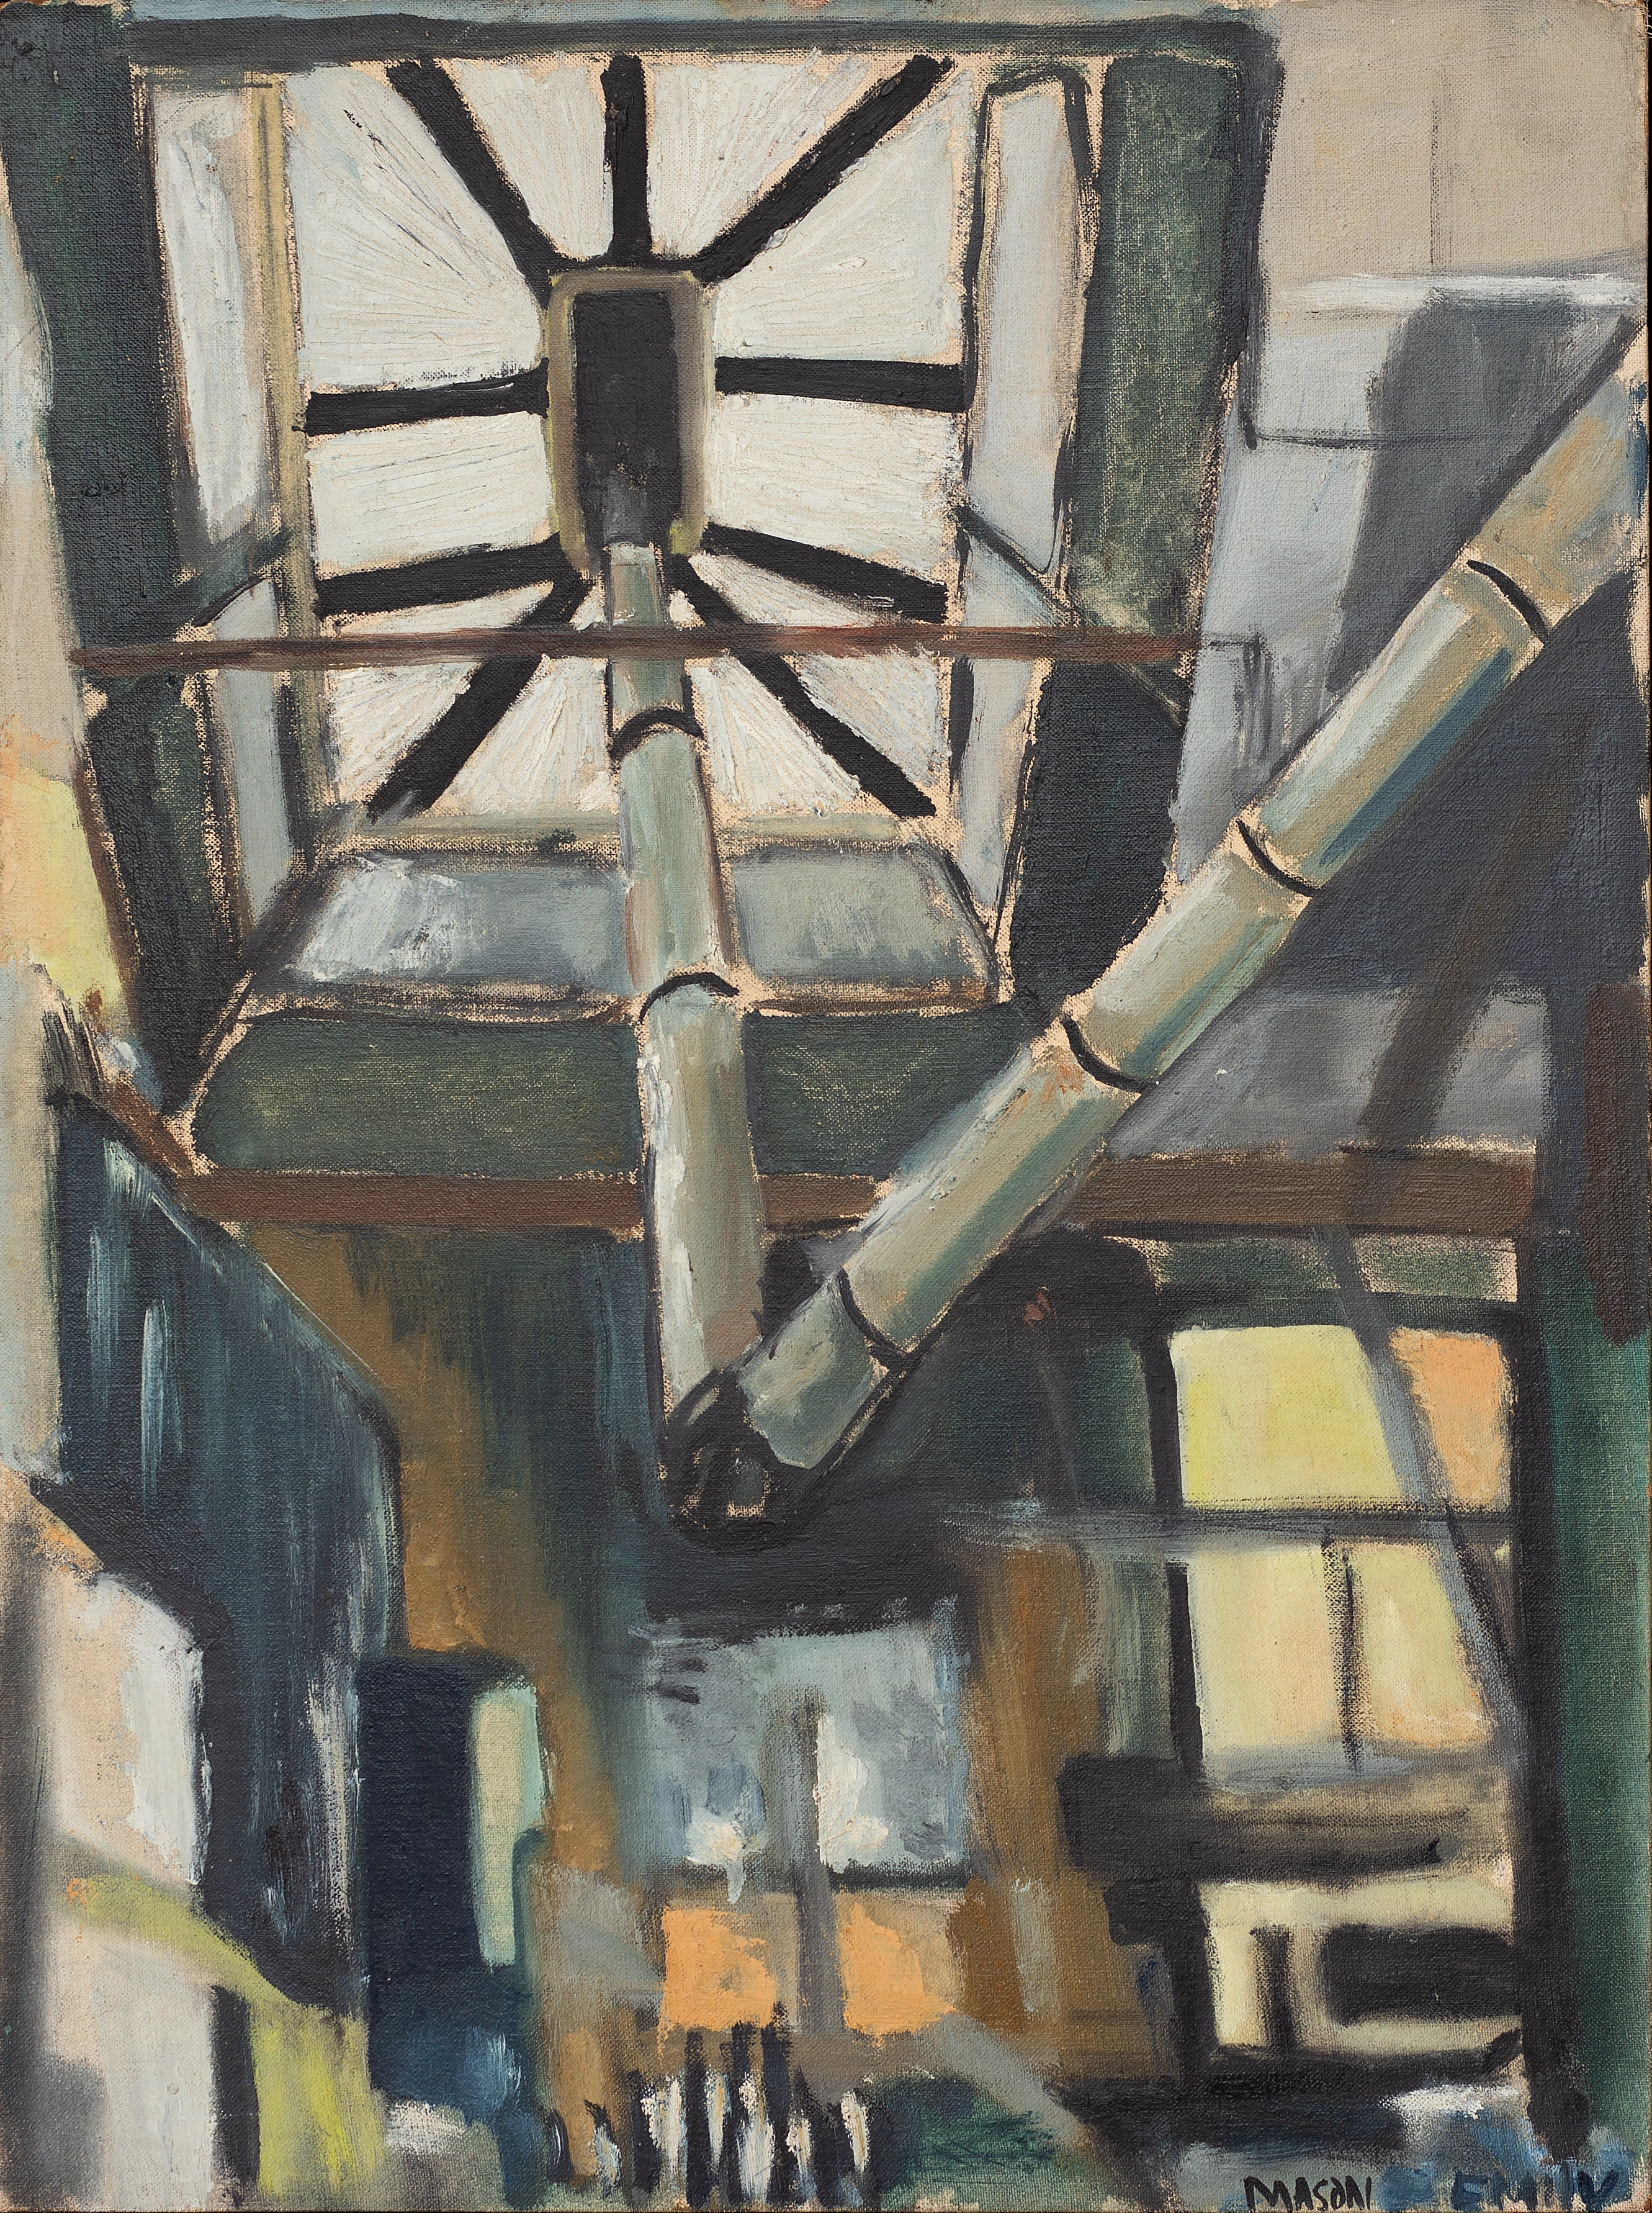 Oil painting of an industrial interior, focusing on the skylight and ceiling with grey metal pipes jutting throughout.